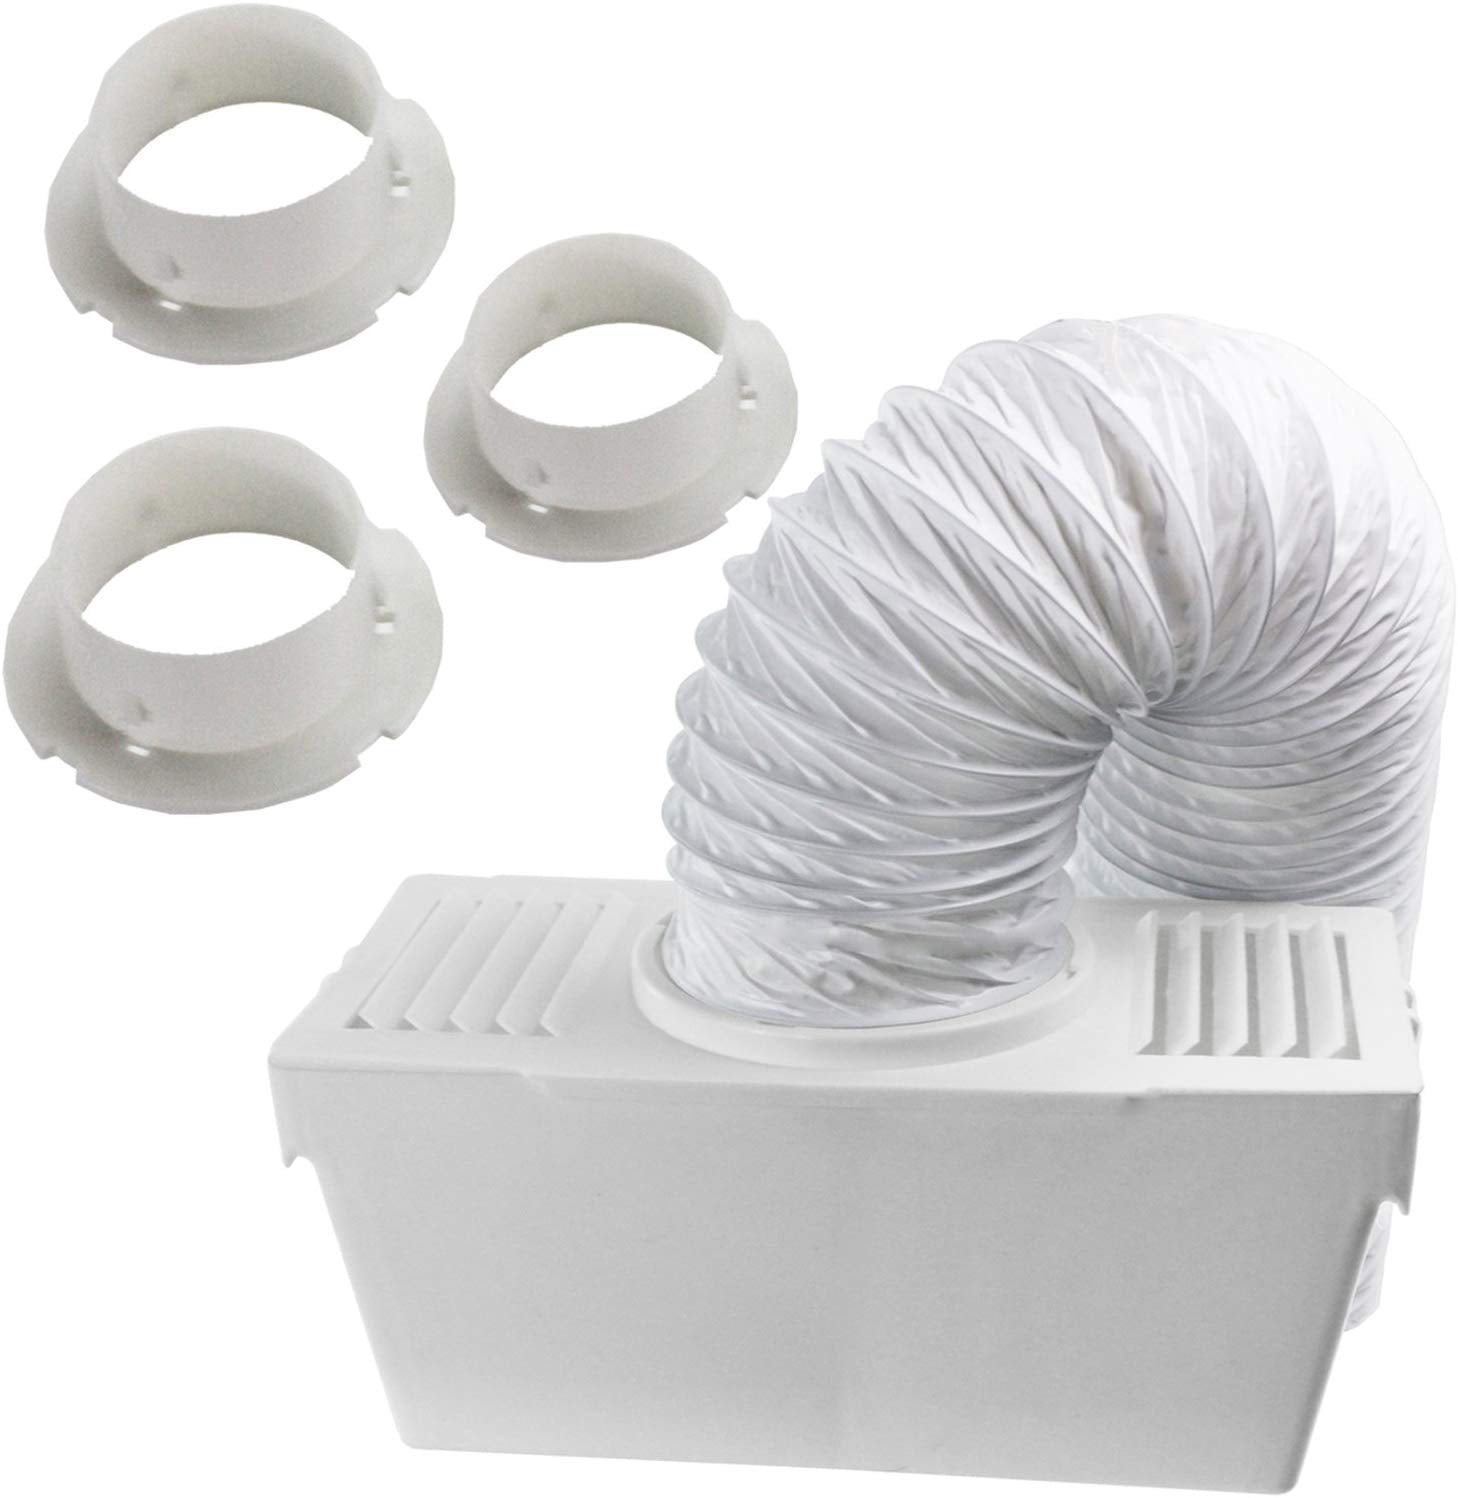 Vent Hose Condenser Kit with 3 x Adapters for Hotpoint Tumble Dryer (1.2m)